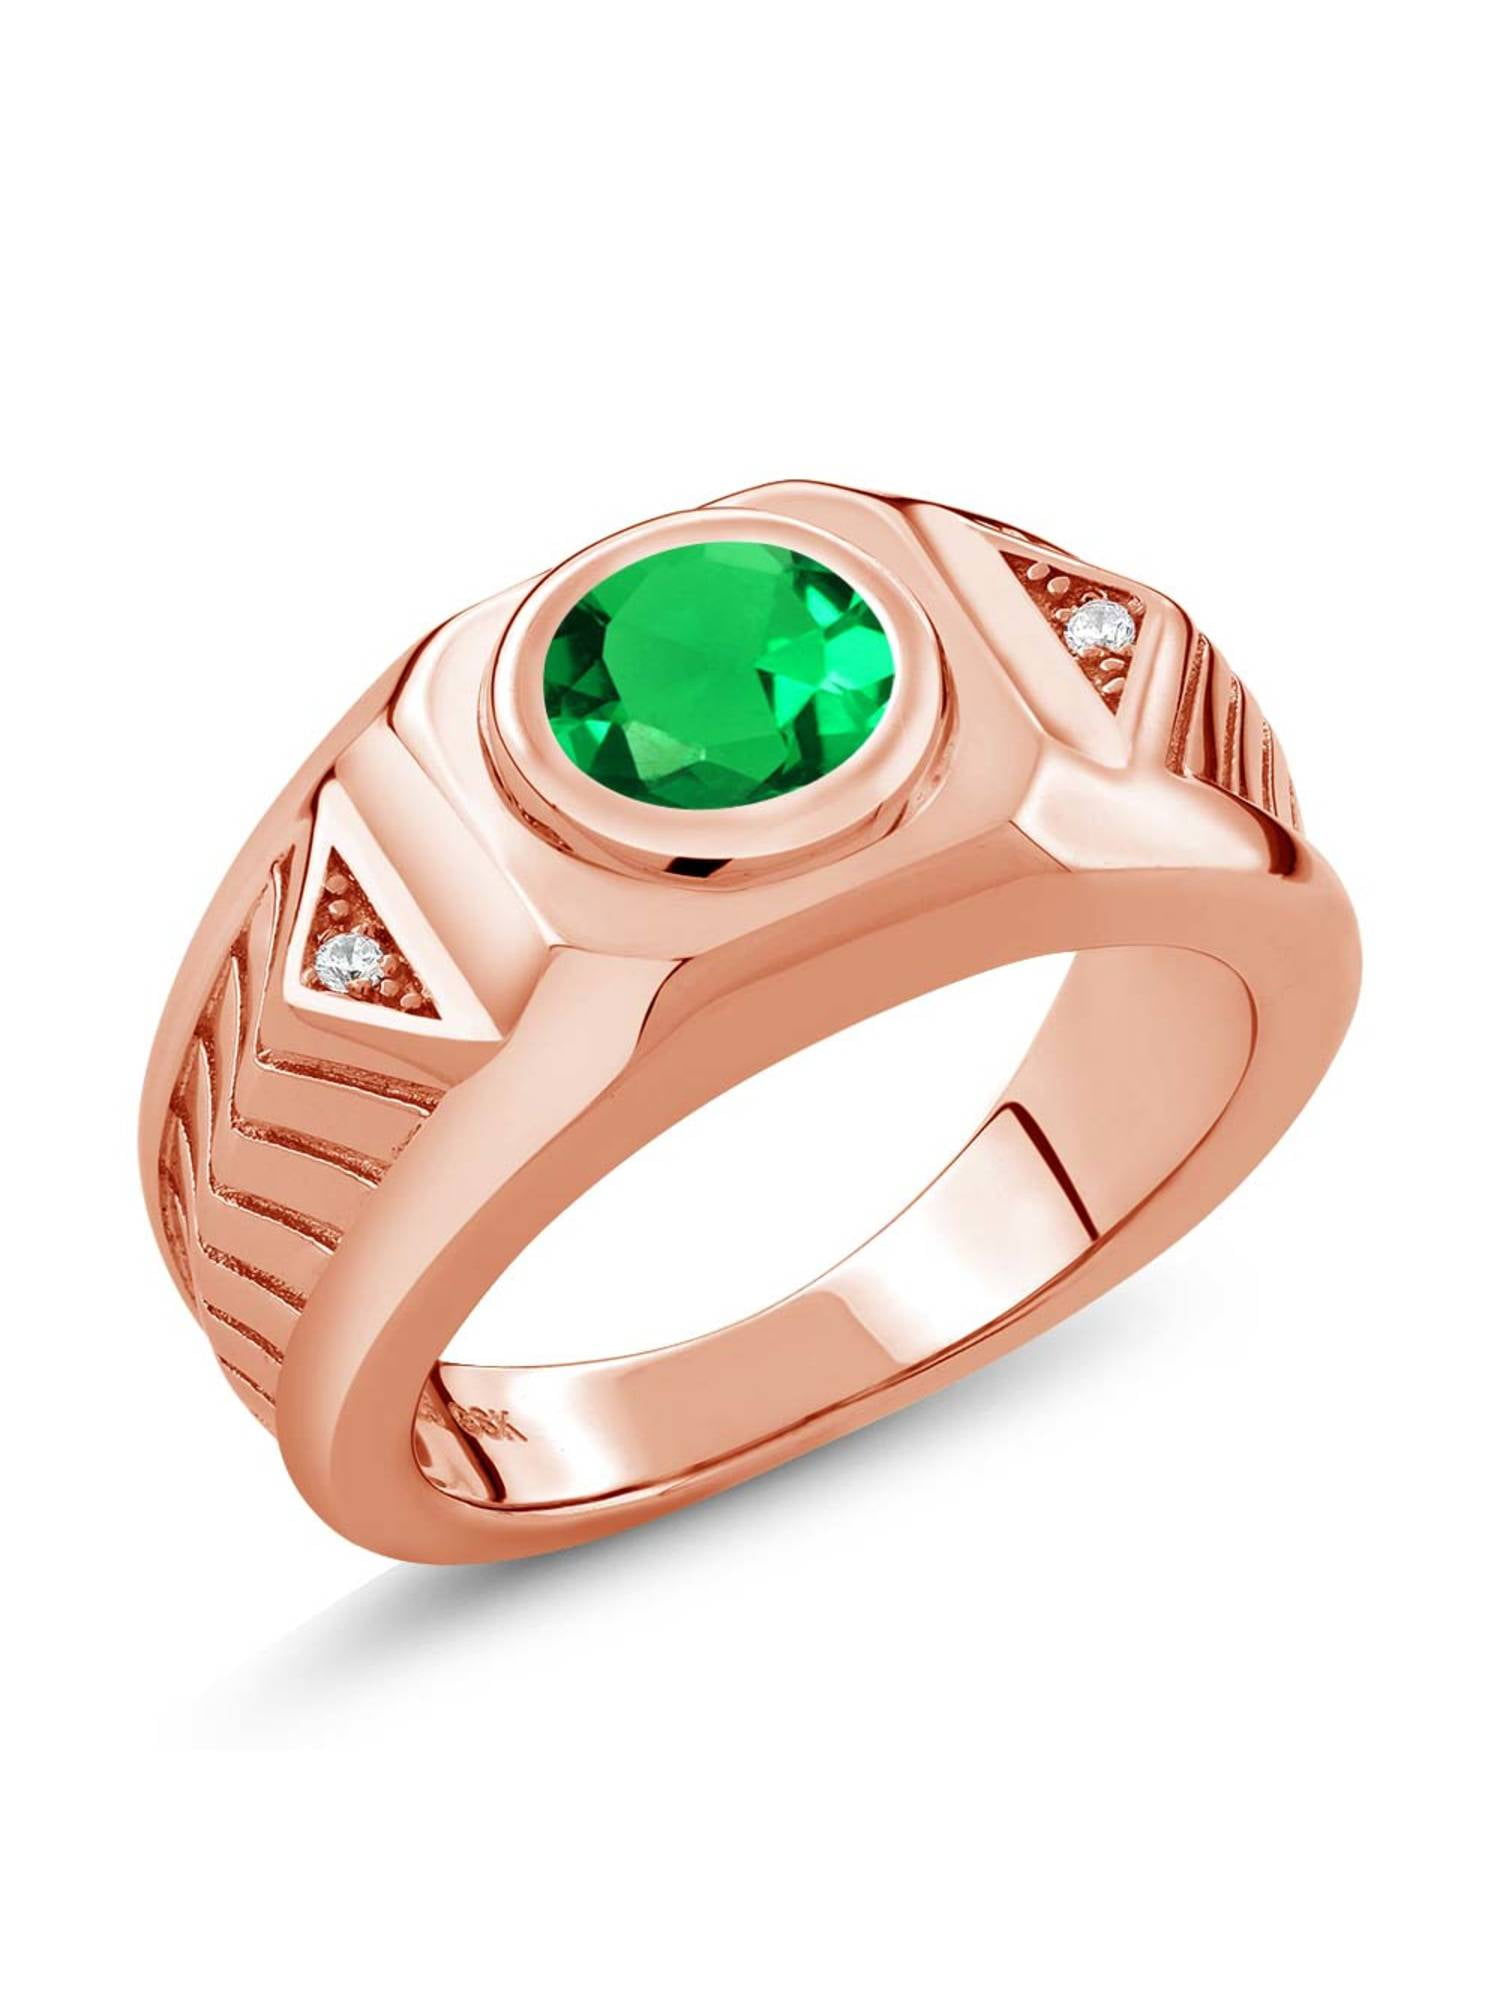 Gem Stone King 1.68 Ct Round Green Simulated Emerald 18K Rose Gold Plated Silver Mens Ring 